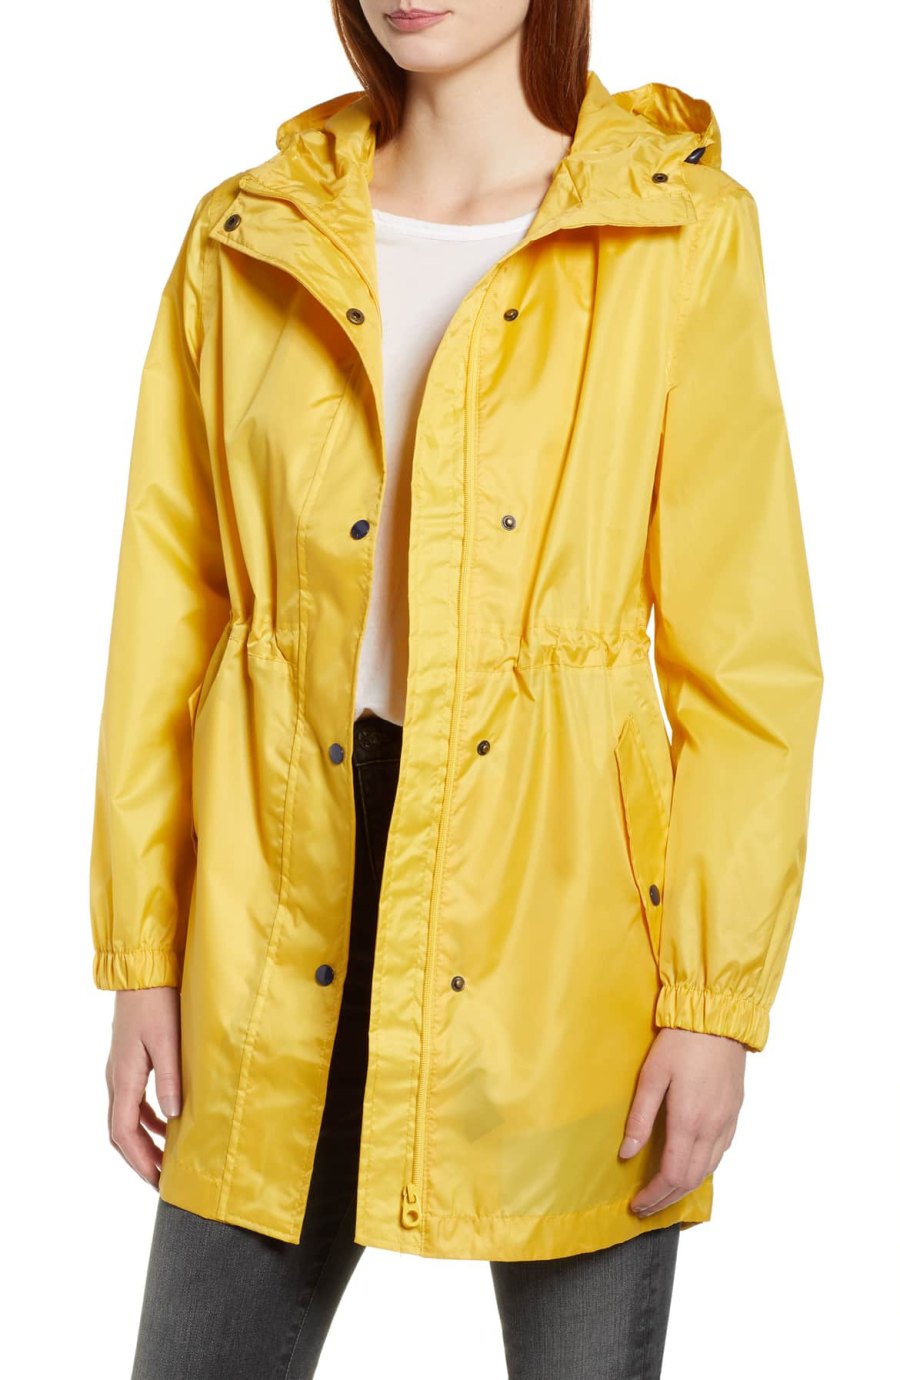 Keep Dry In Style with The Joules Printed Rain Coat for Under $100 ...